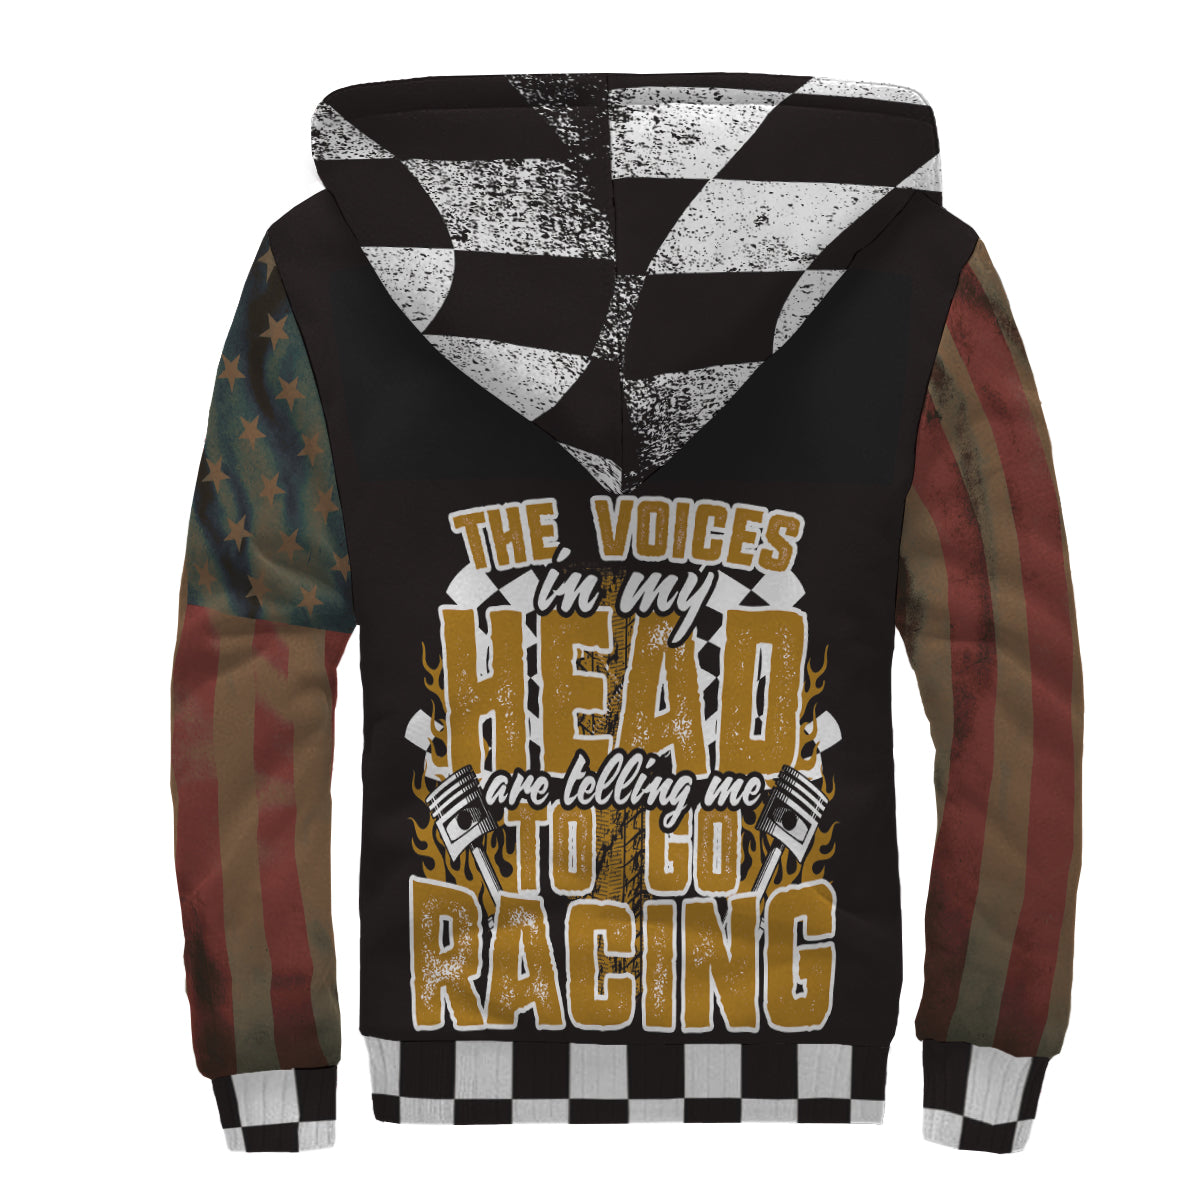 The Voices In My Head are telling me to go racing USA Racing Sherpa Jacket